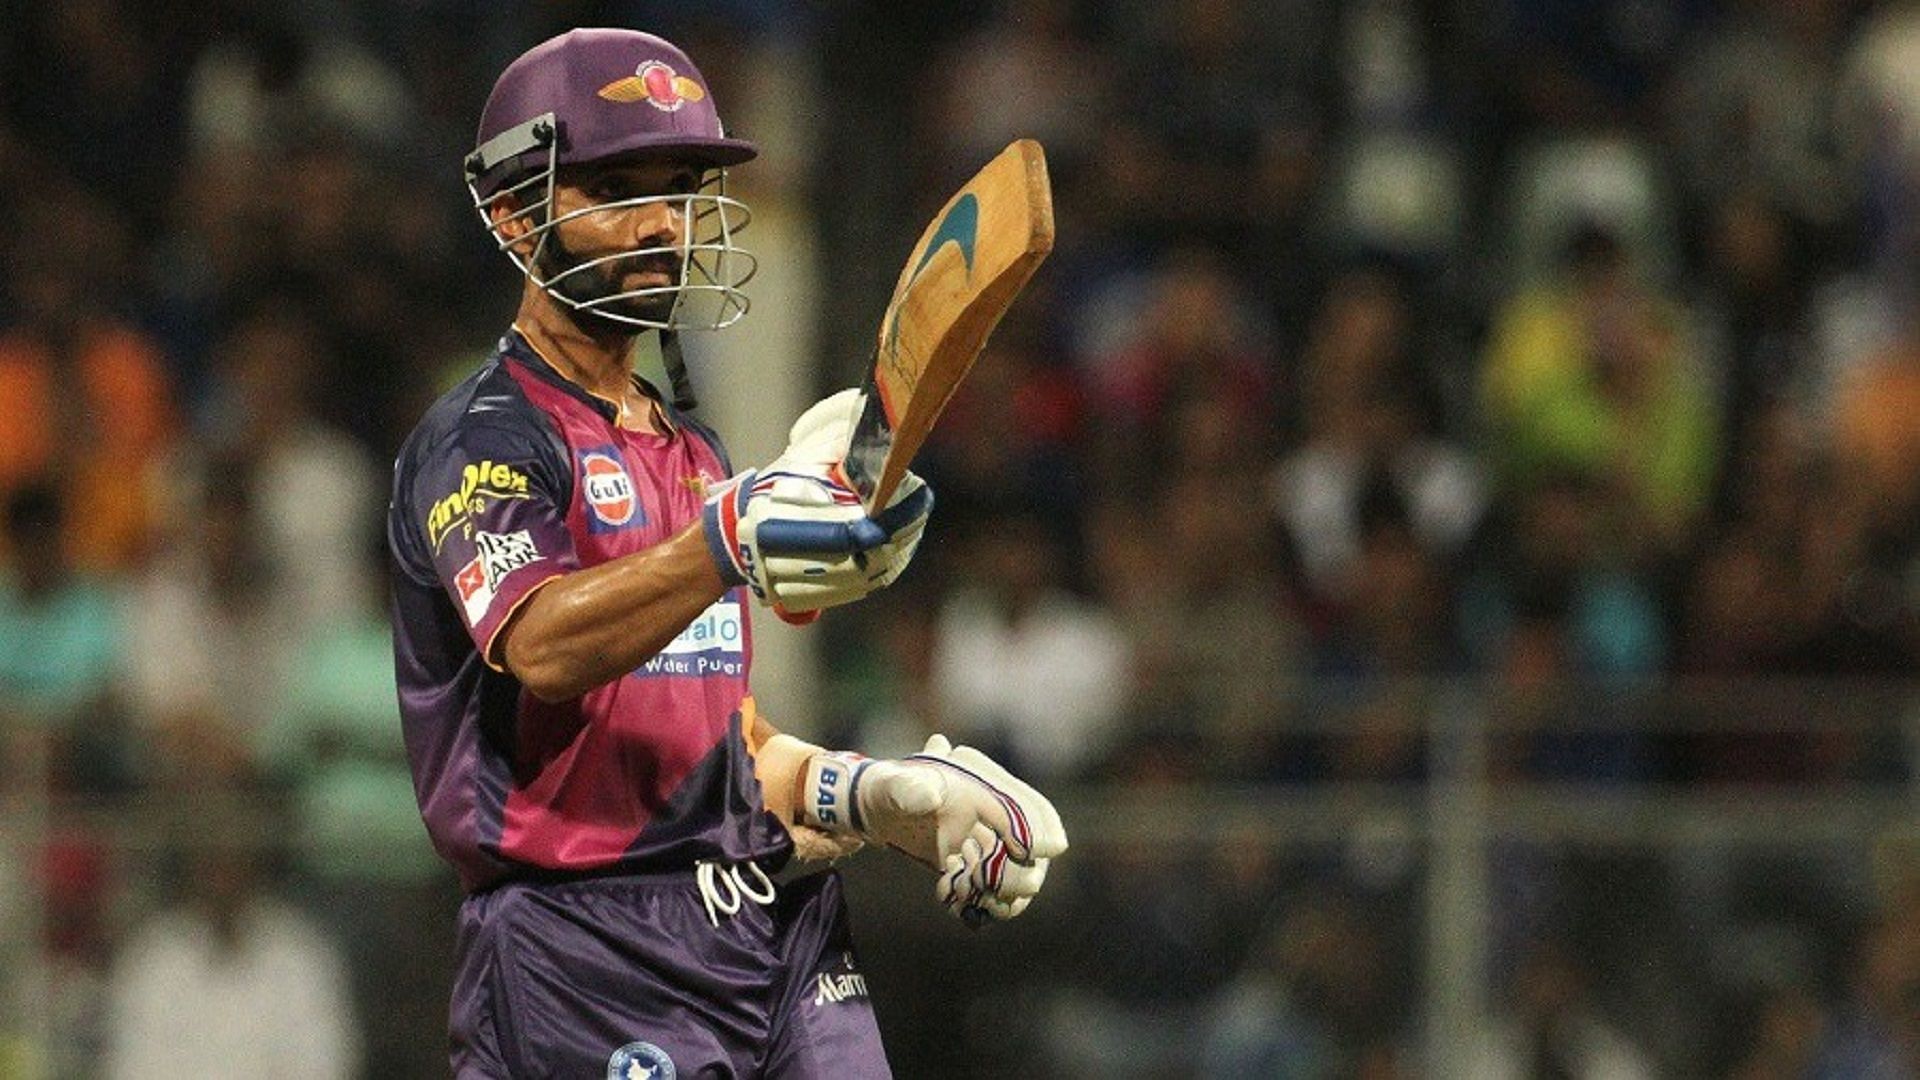 The RPSG Group is familiar with Rahane due to his stint with their Pune franchise